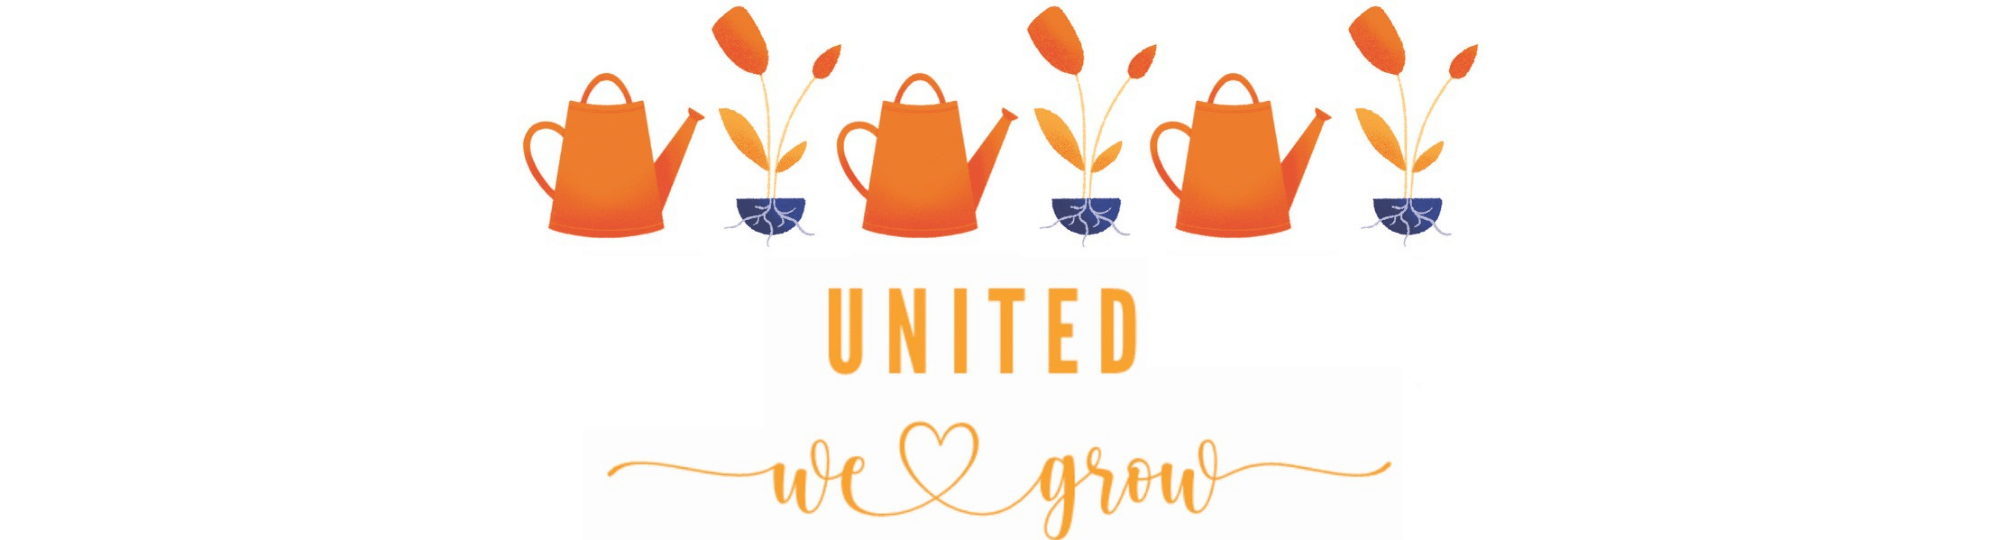 United we grow image of watering cans and flowers